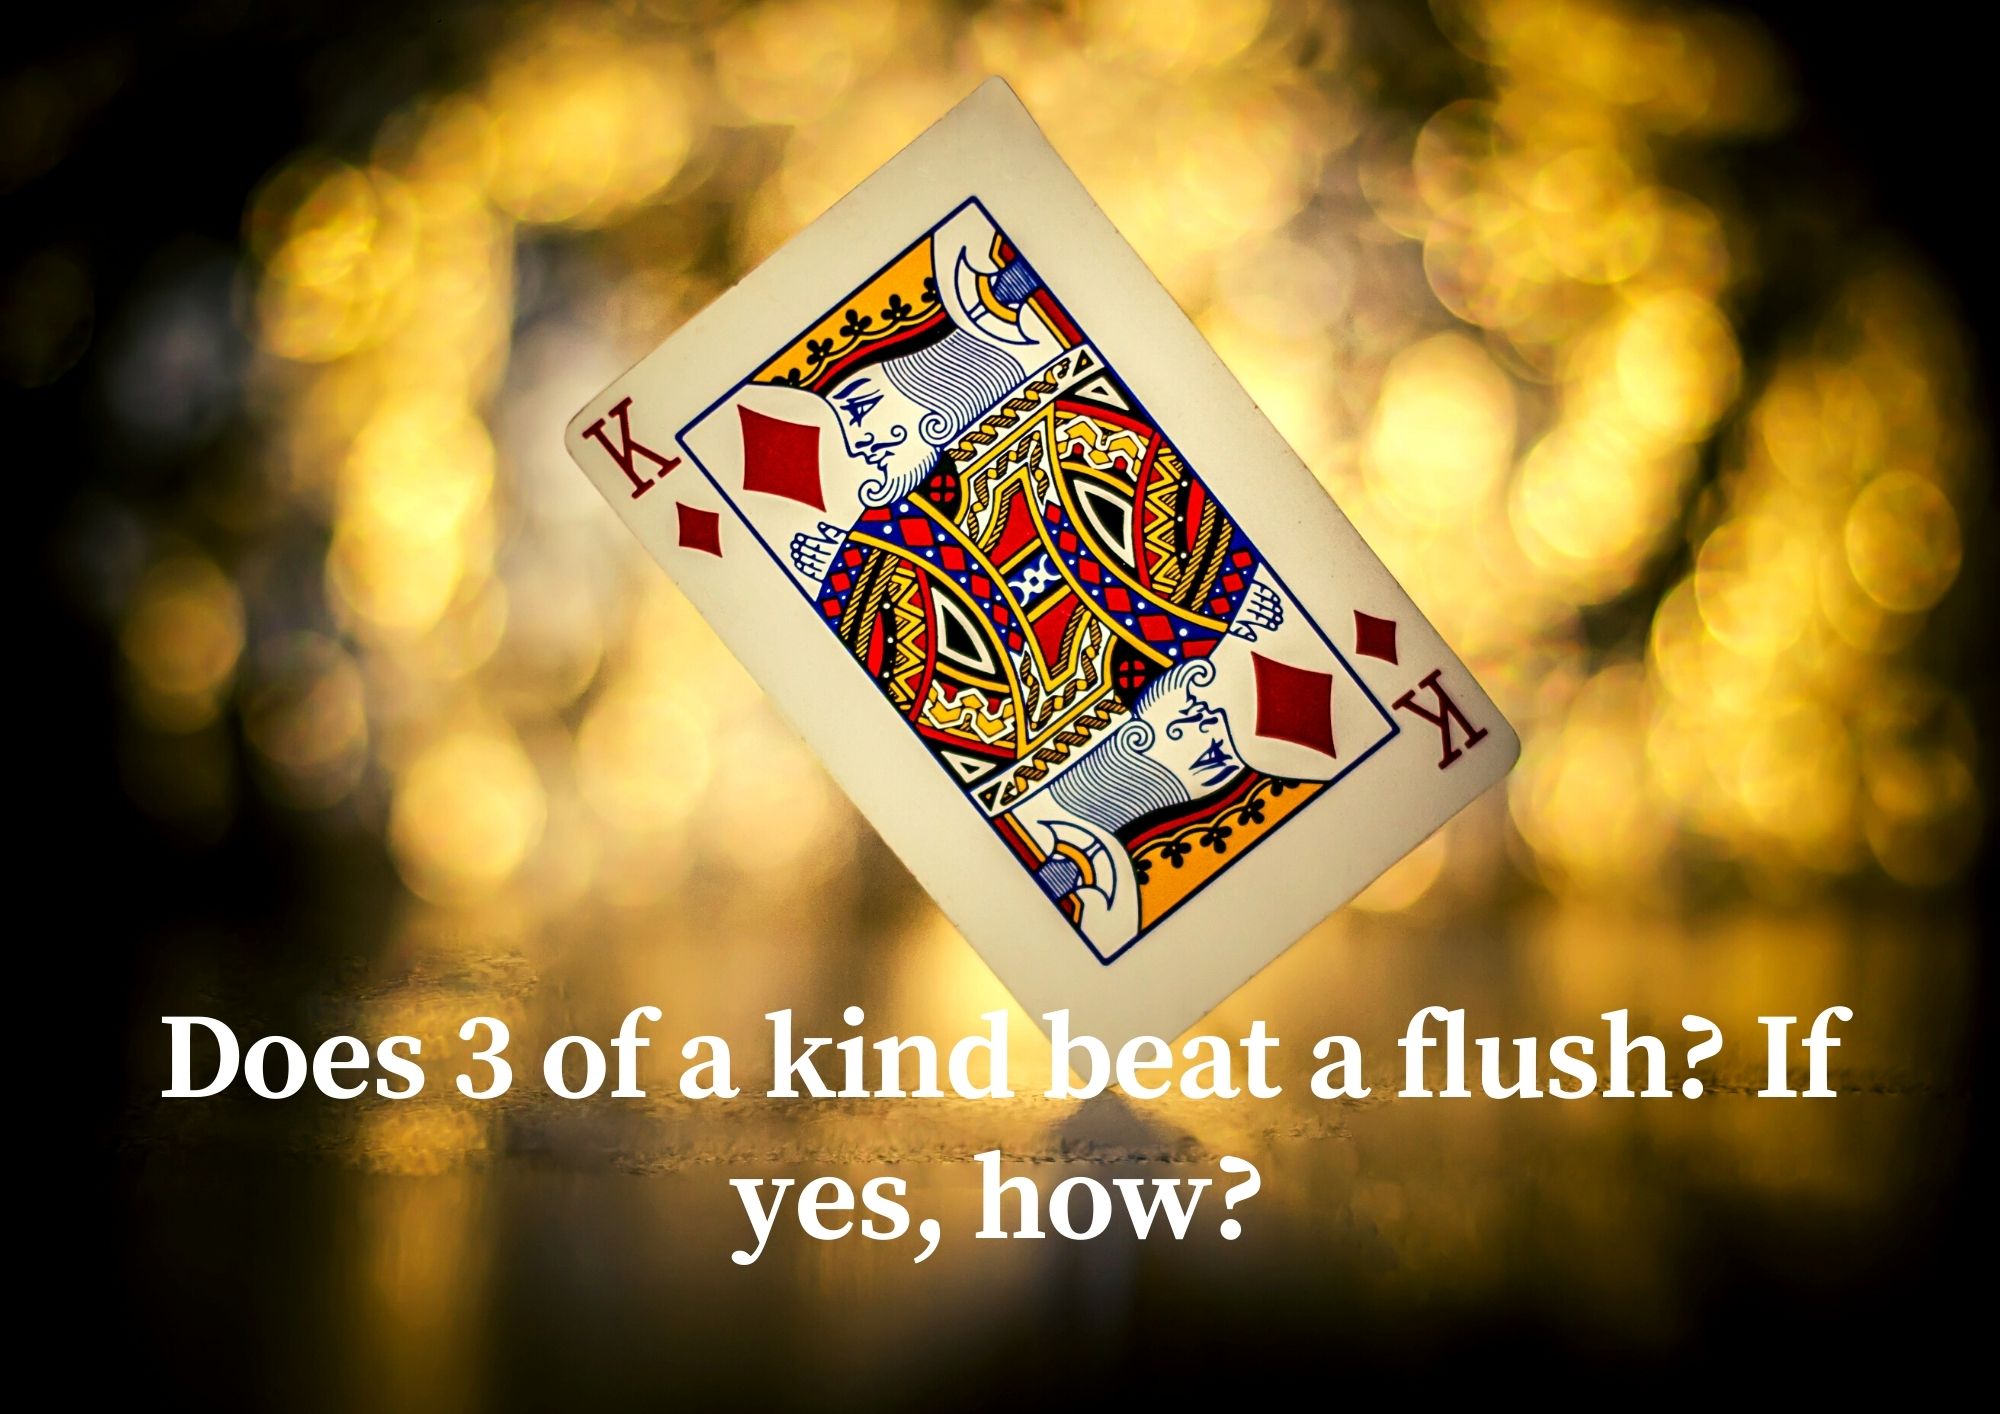 does 3 of a kind beat a flush?